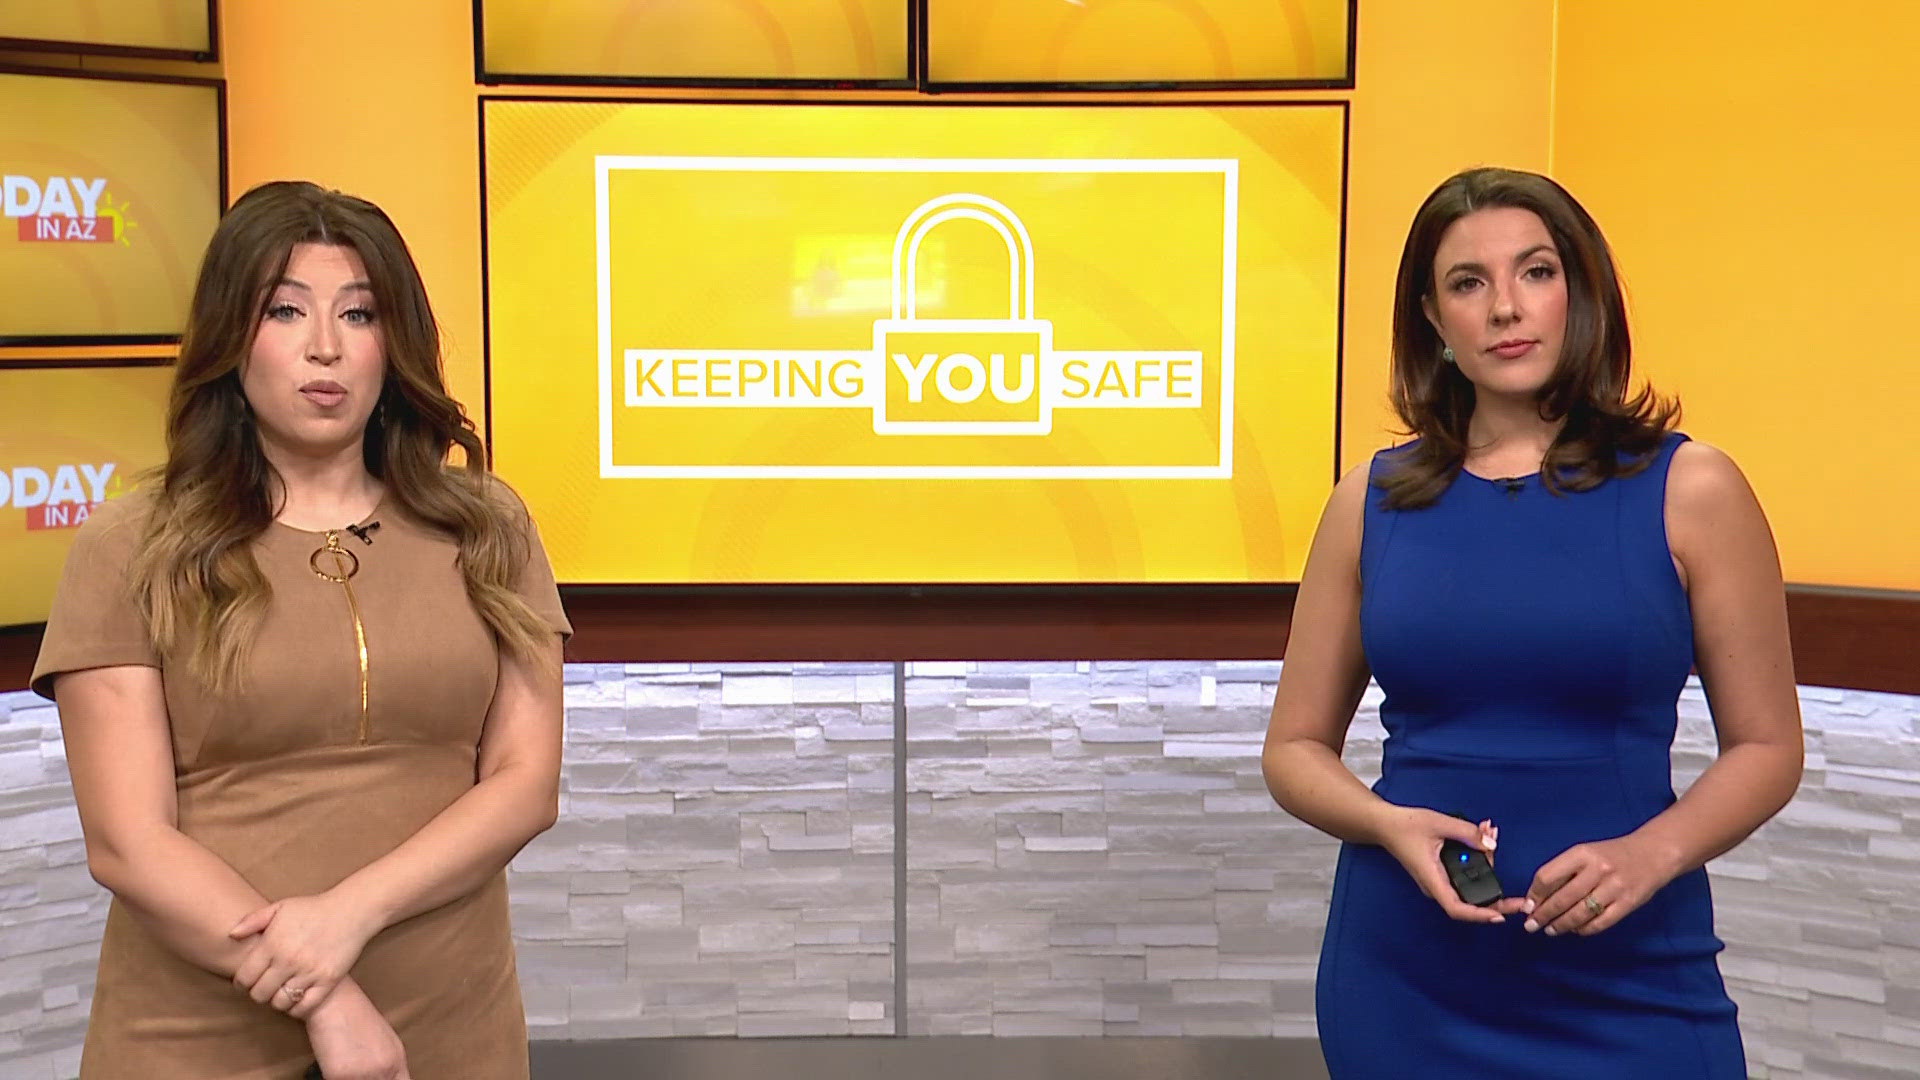 Learn more about a Hyundai car recall and a settlement with Ring cameras in our 12News Keeping You Safe segment.